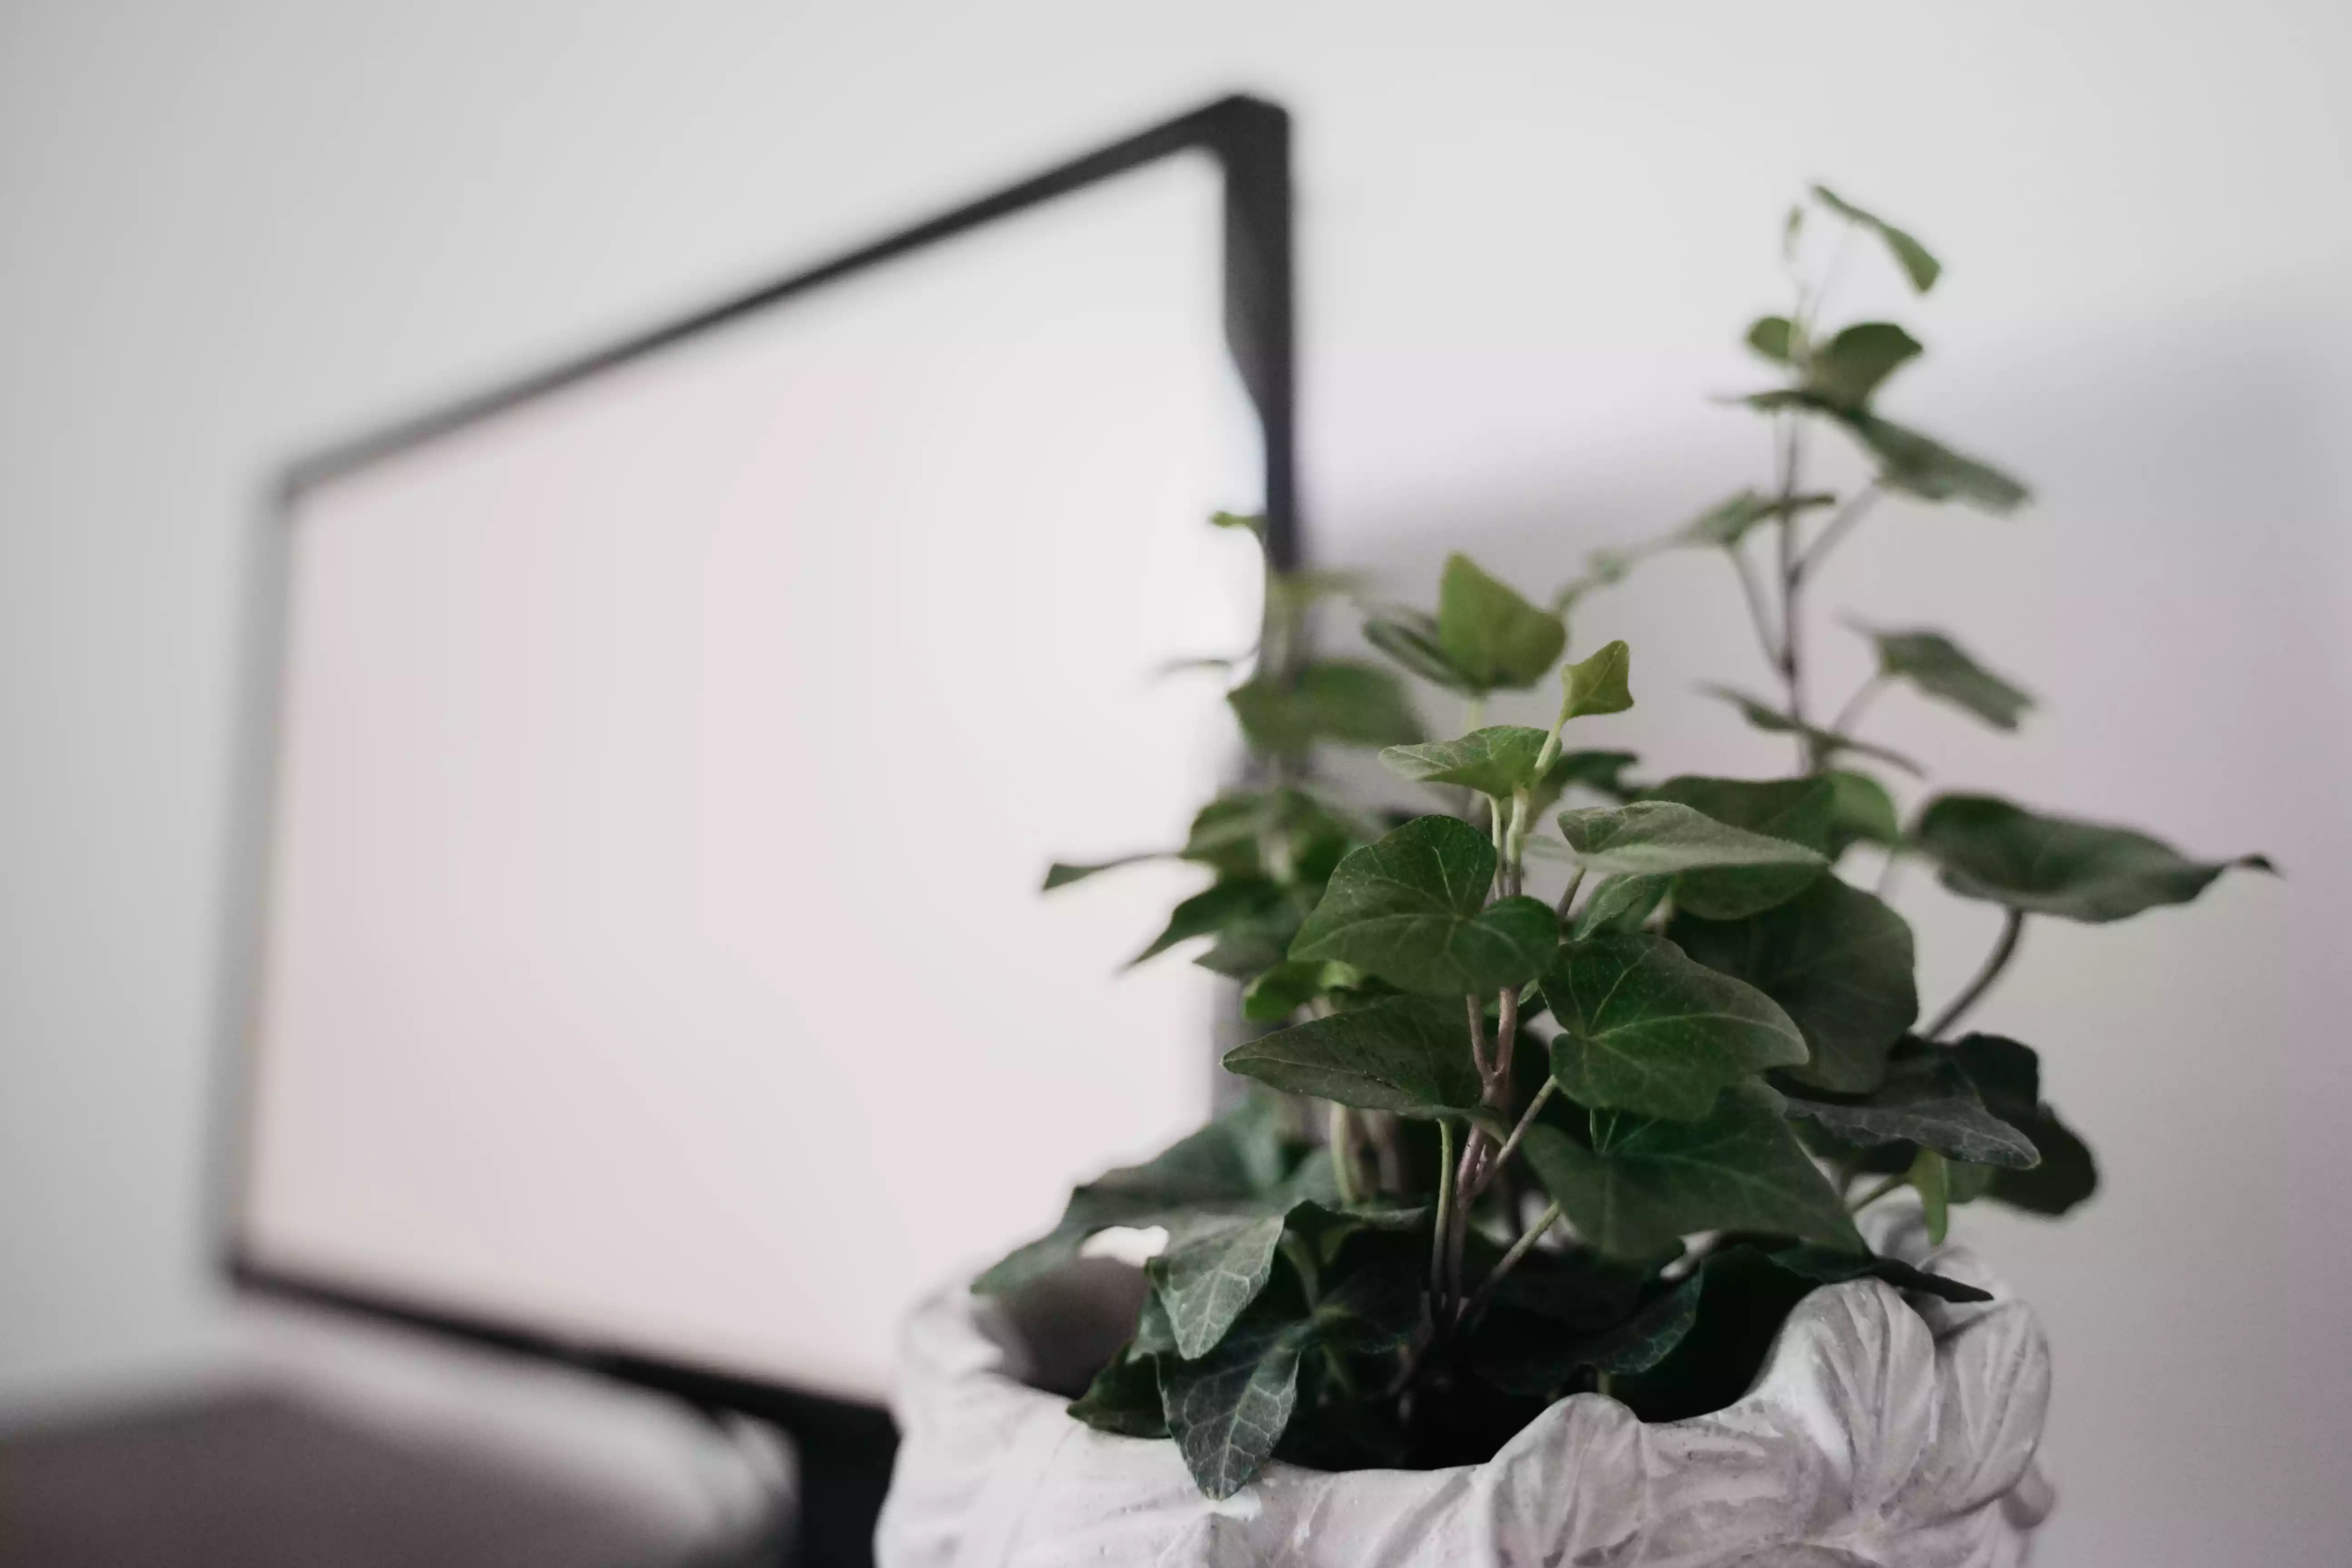 English ivy plant in white container with large flat screen TV in background